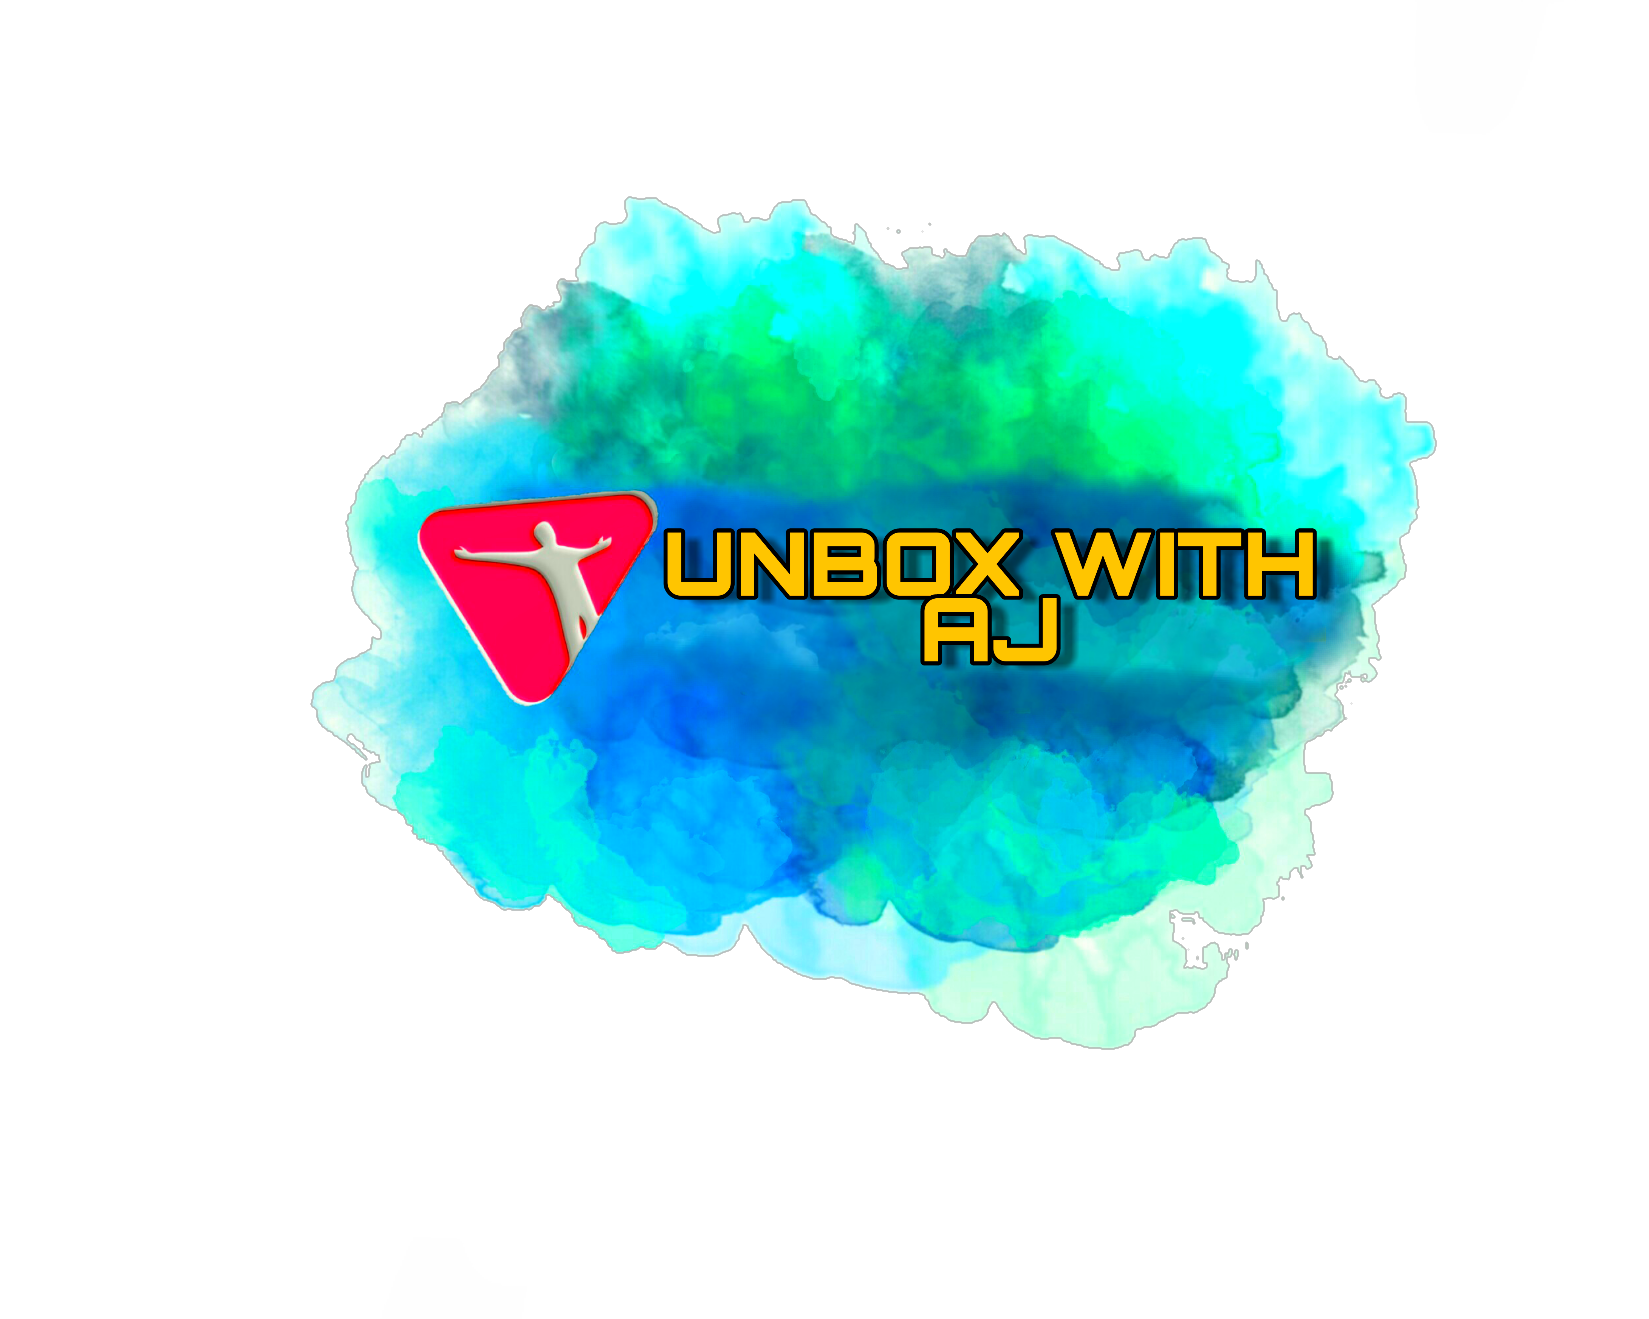 UNBOX WITH AJ